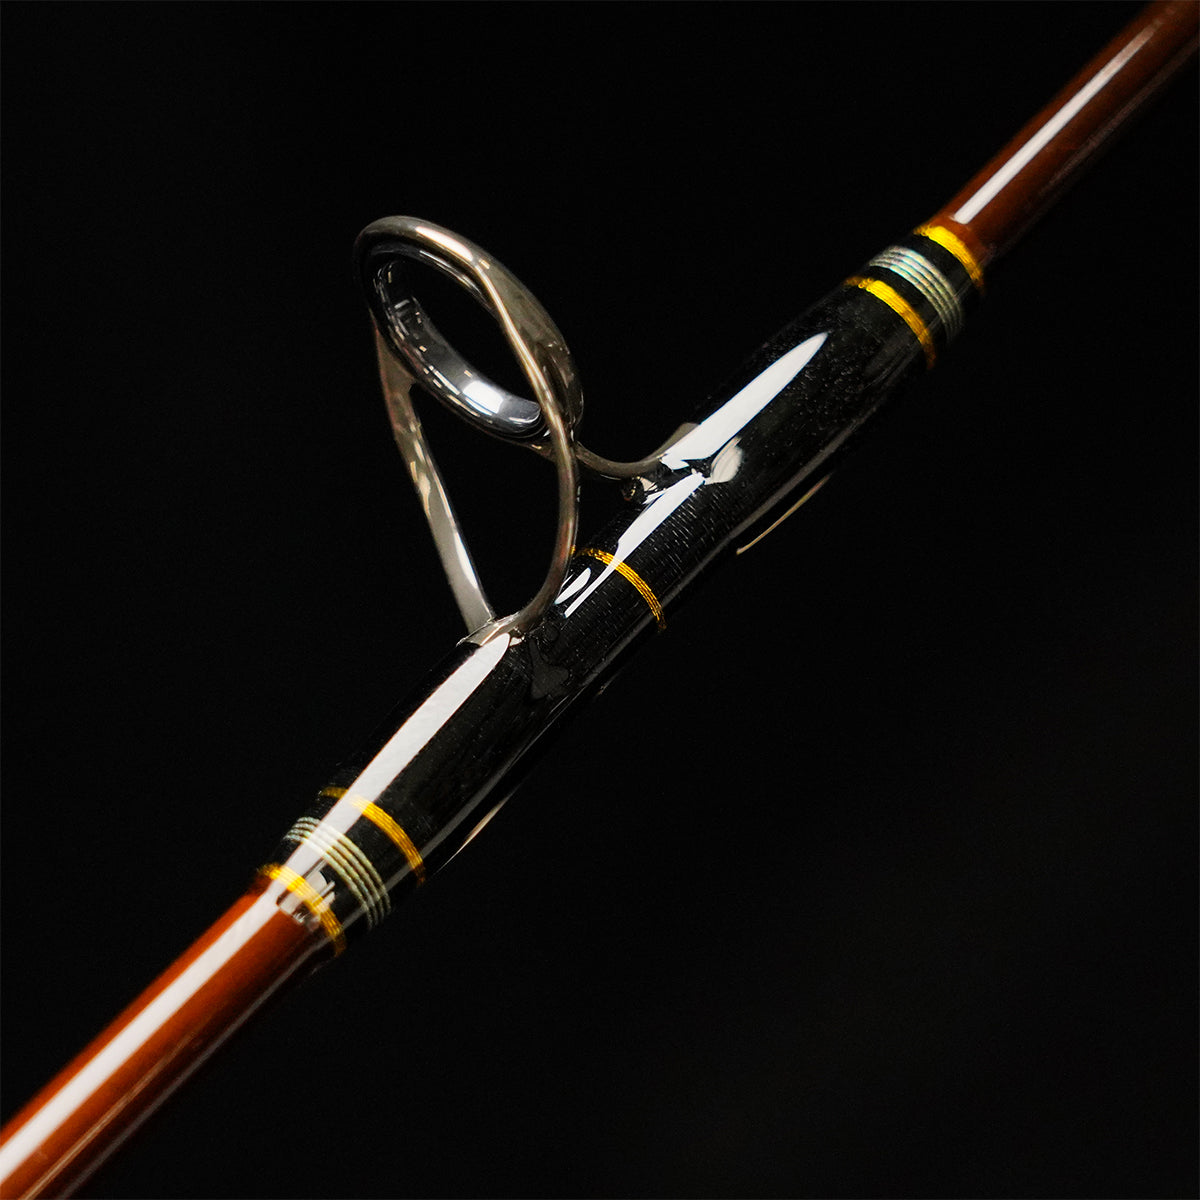 Cow Special 75 II Popping Rod